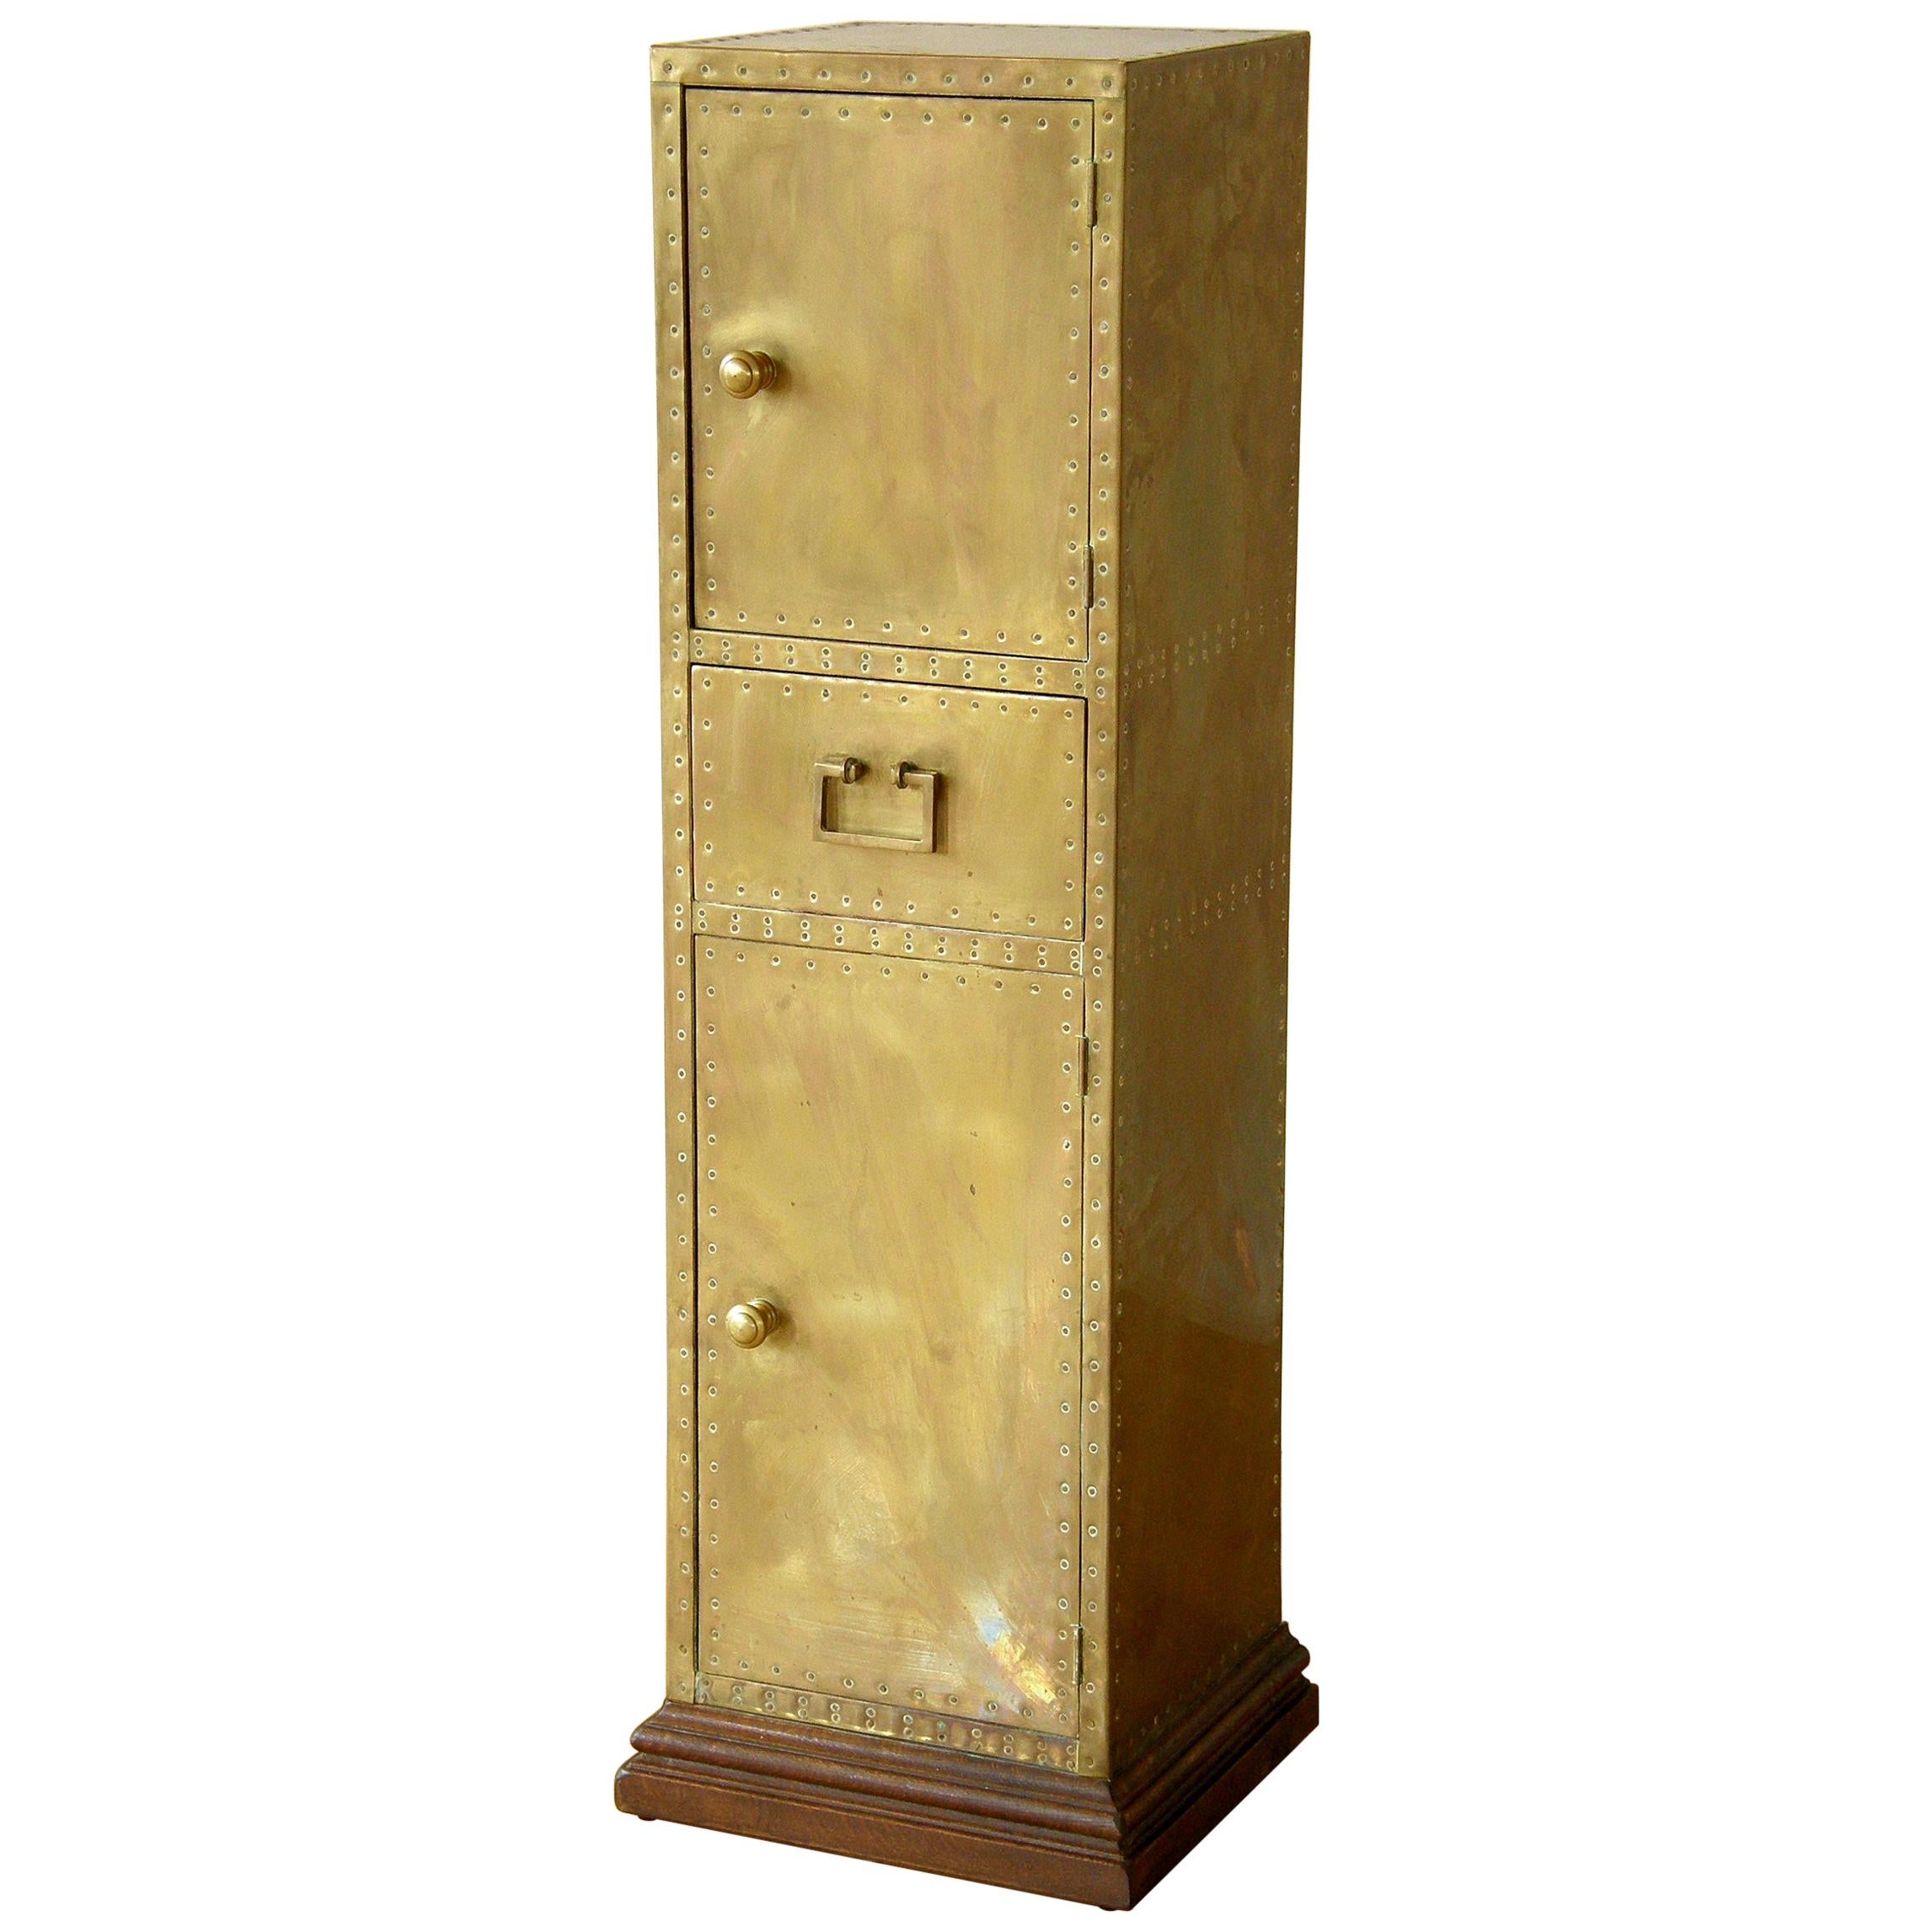 Sarreid Tall and Slender Brass Clad Cabinet with Decorative Nail Head Pattern